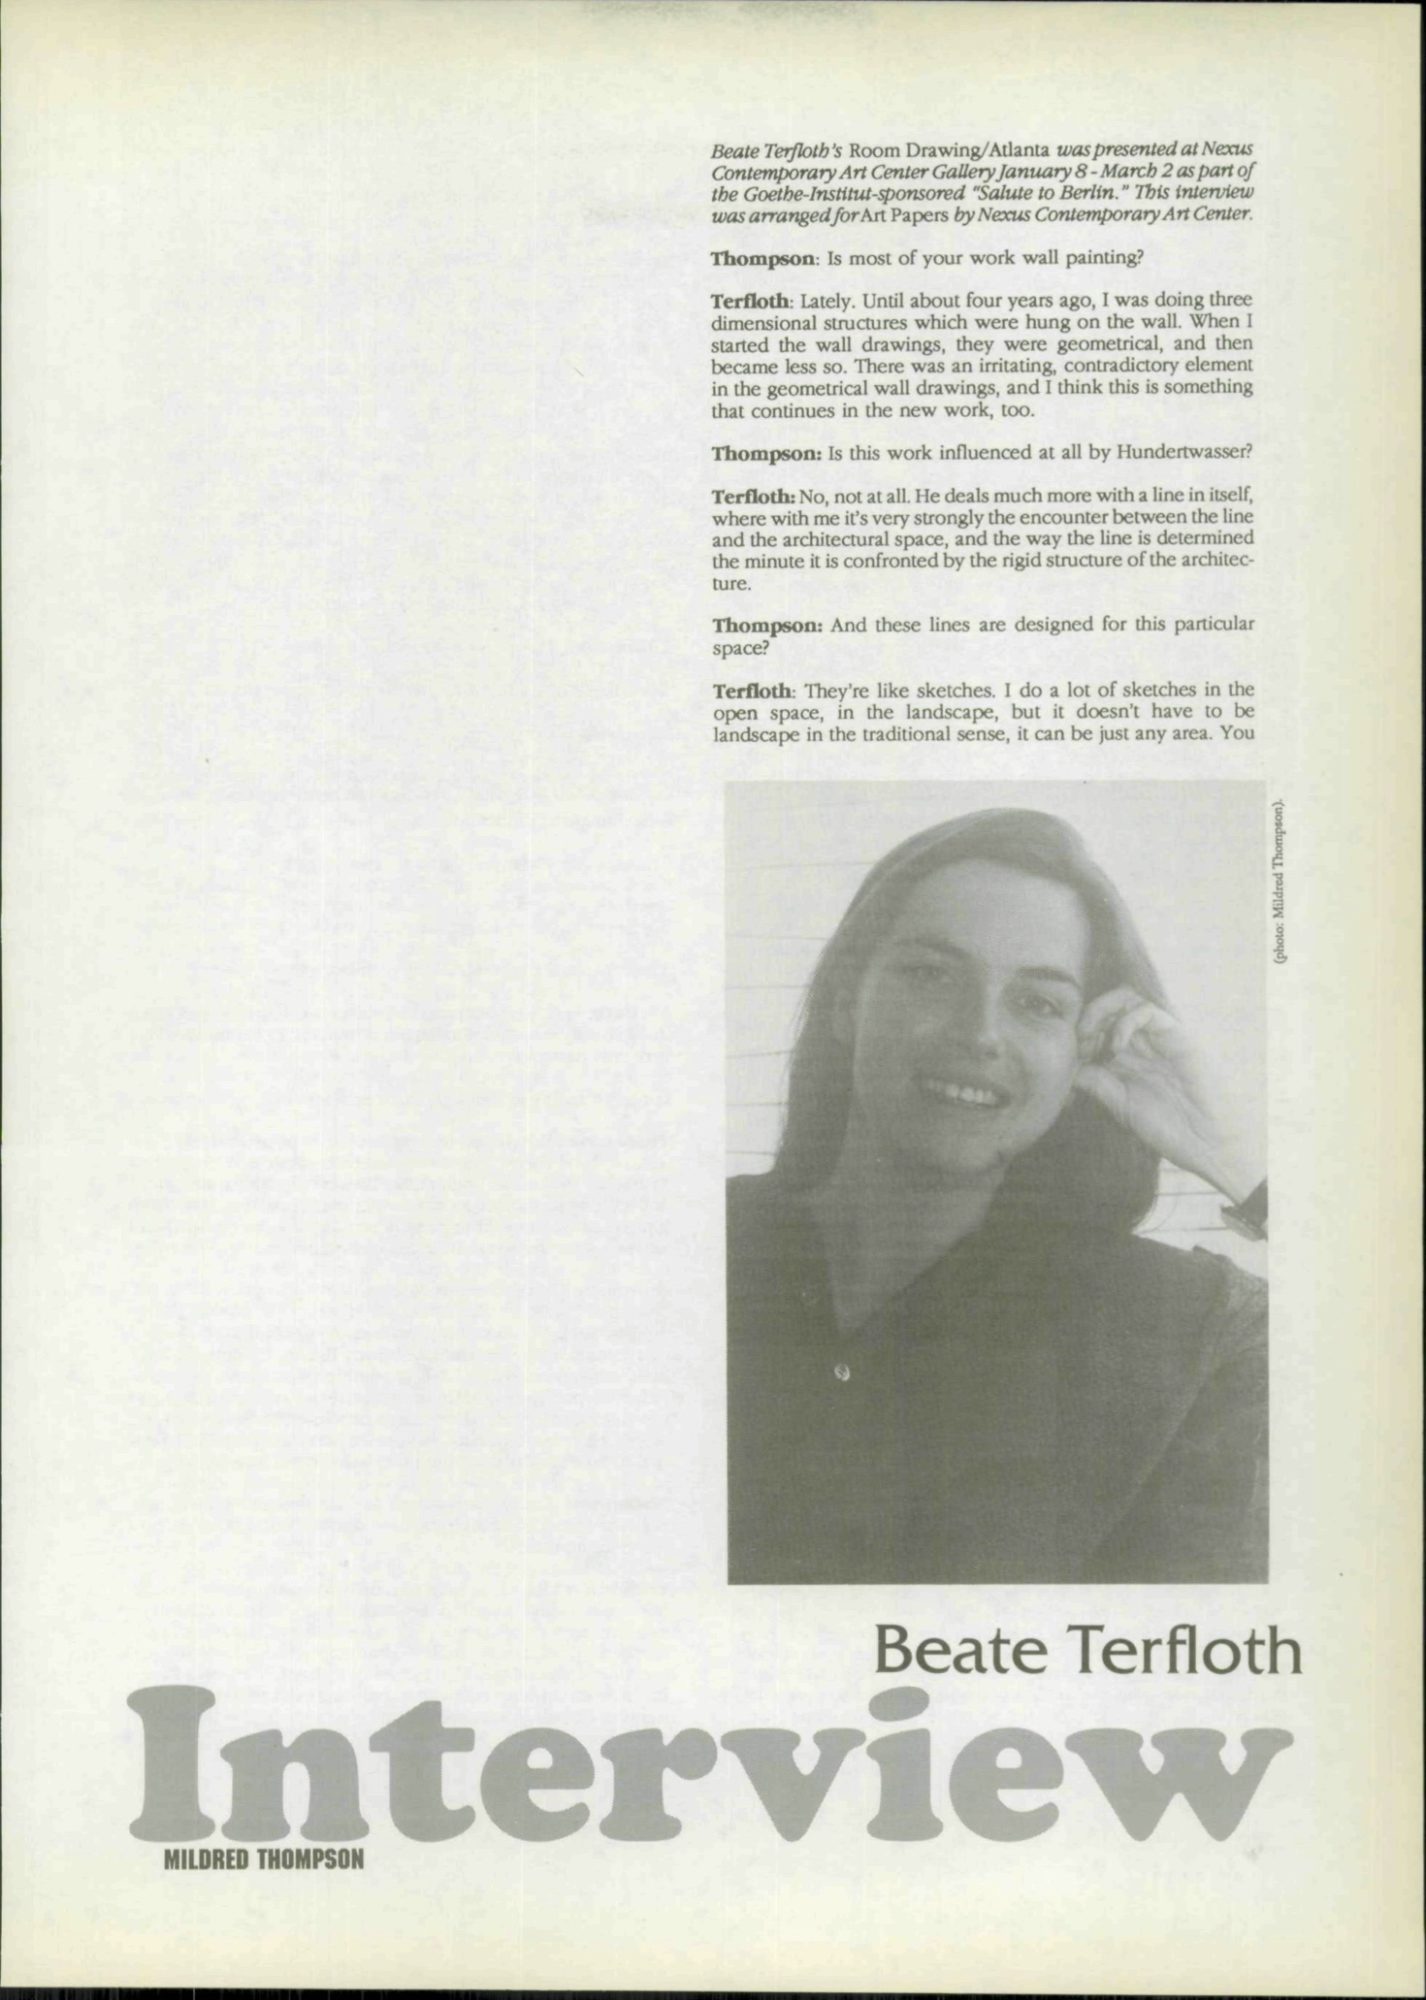 Transcript of interview with Beate Terfloth